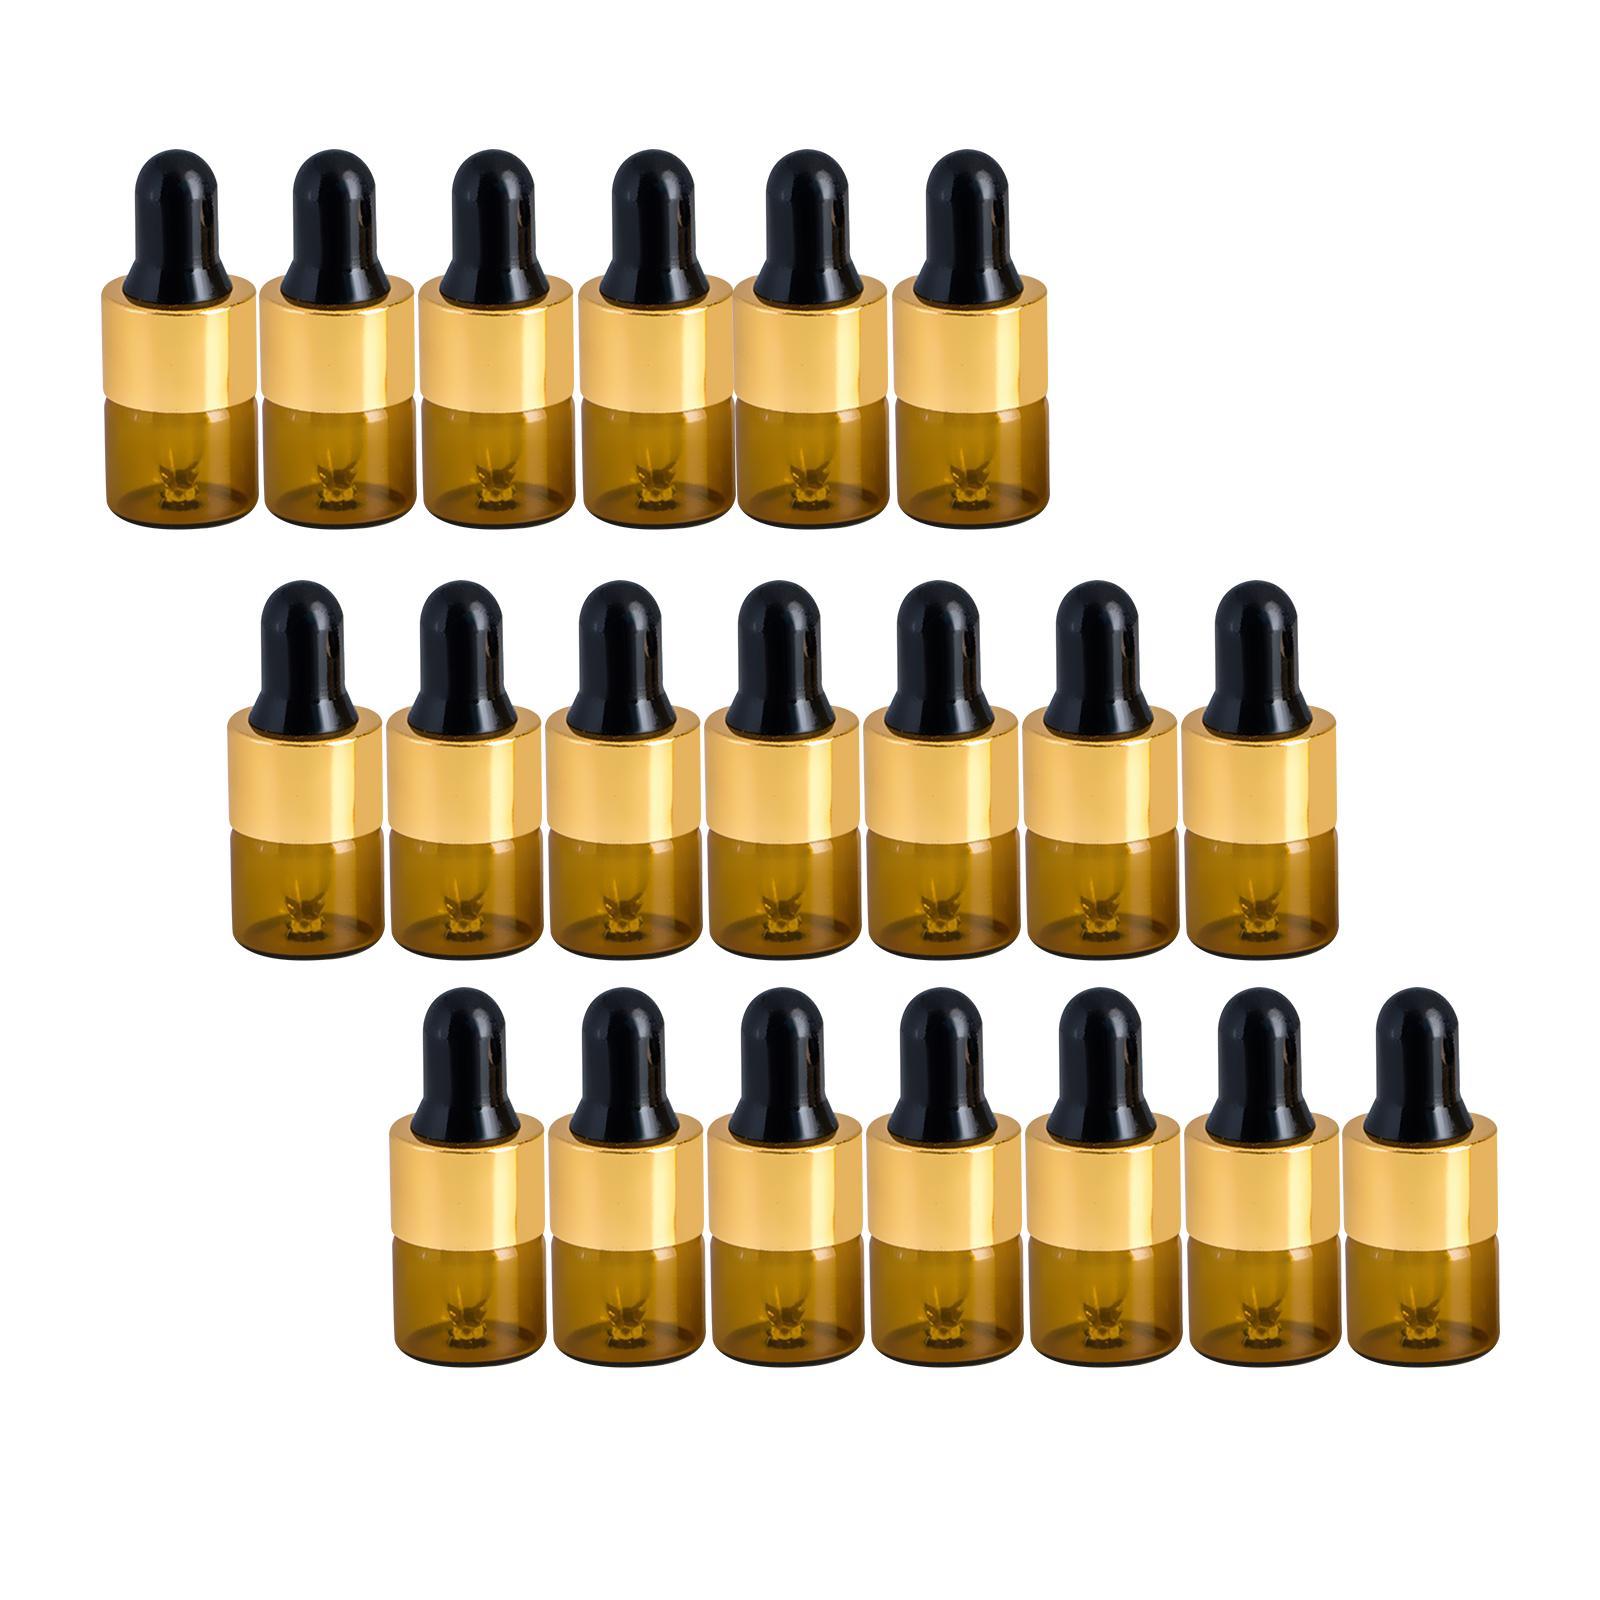 20x Dropper Bottles with Glass Eye Dropper Refillable for Perfume Storage